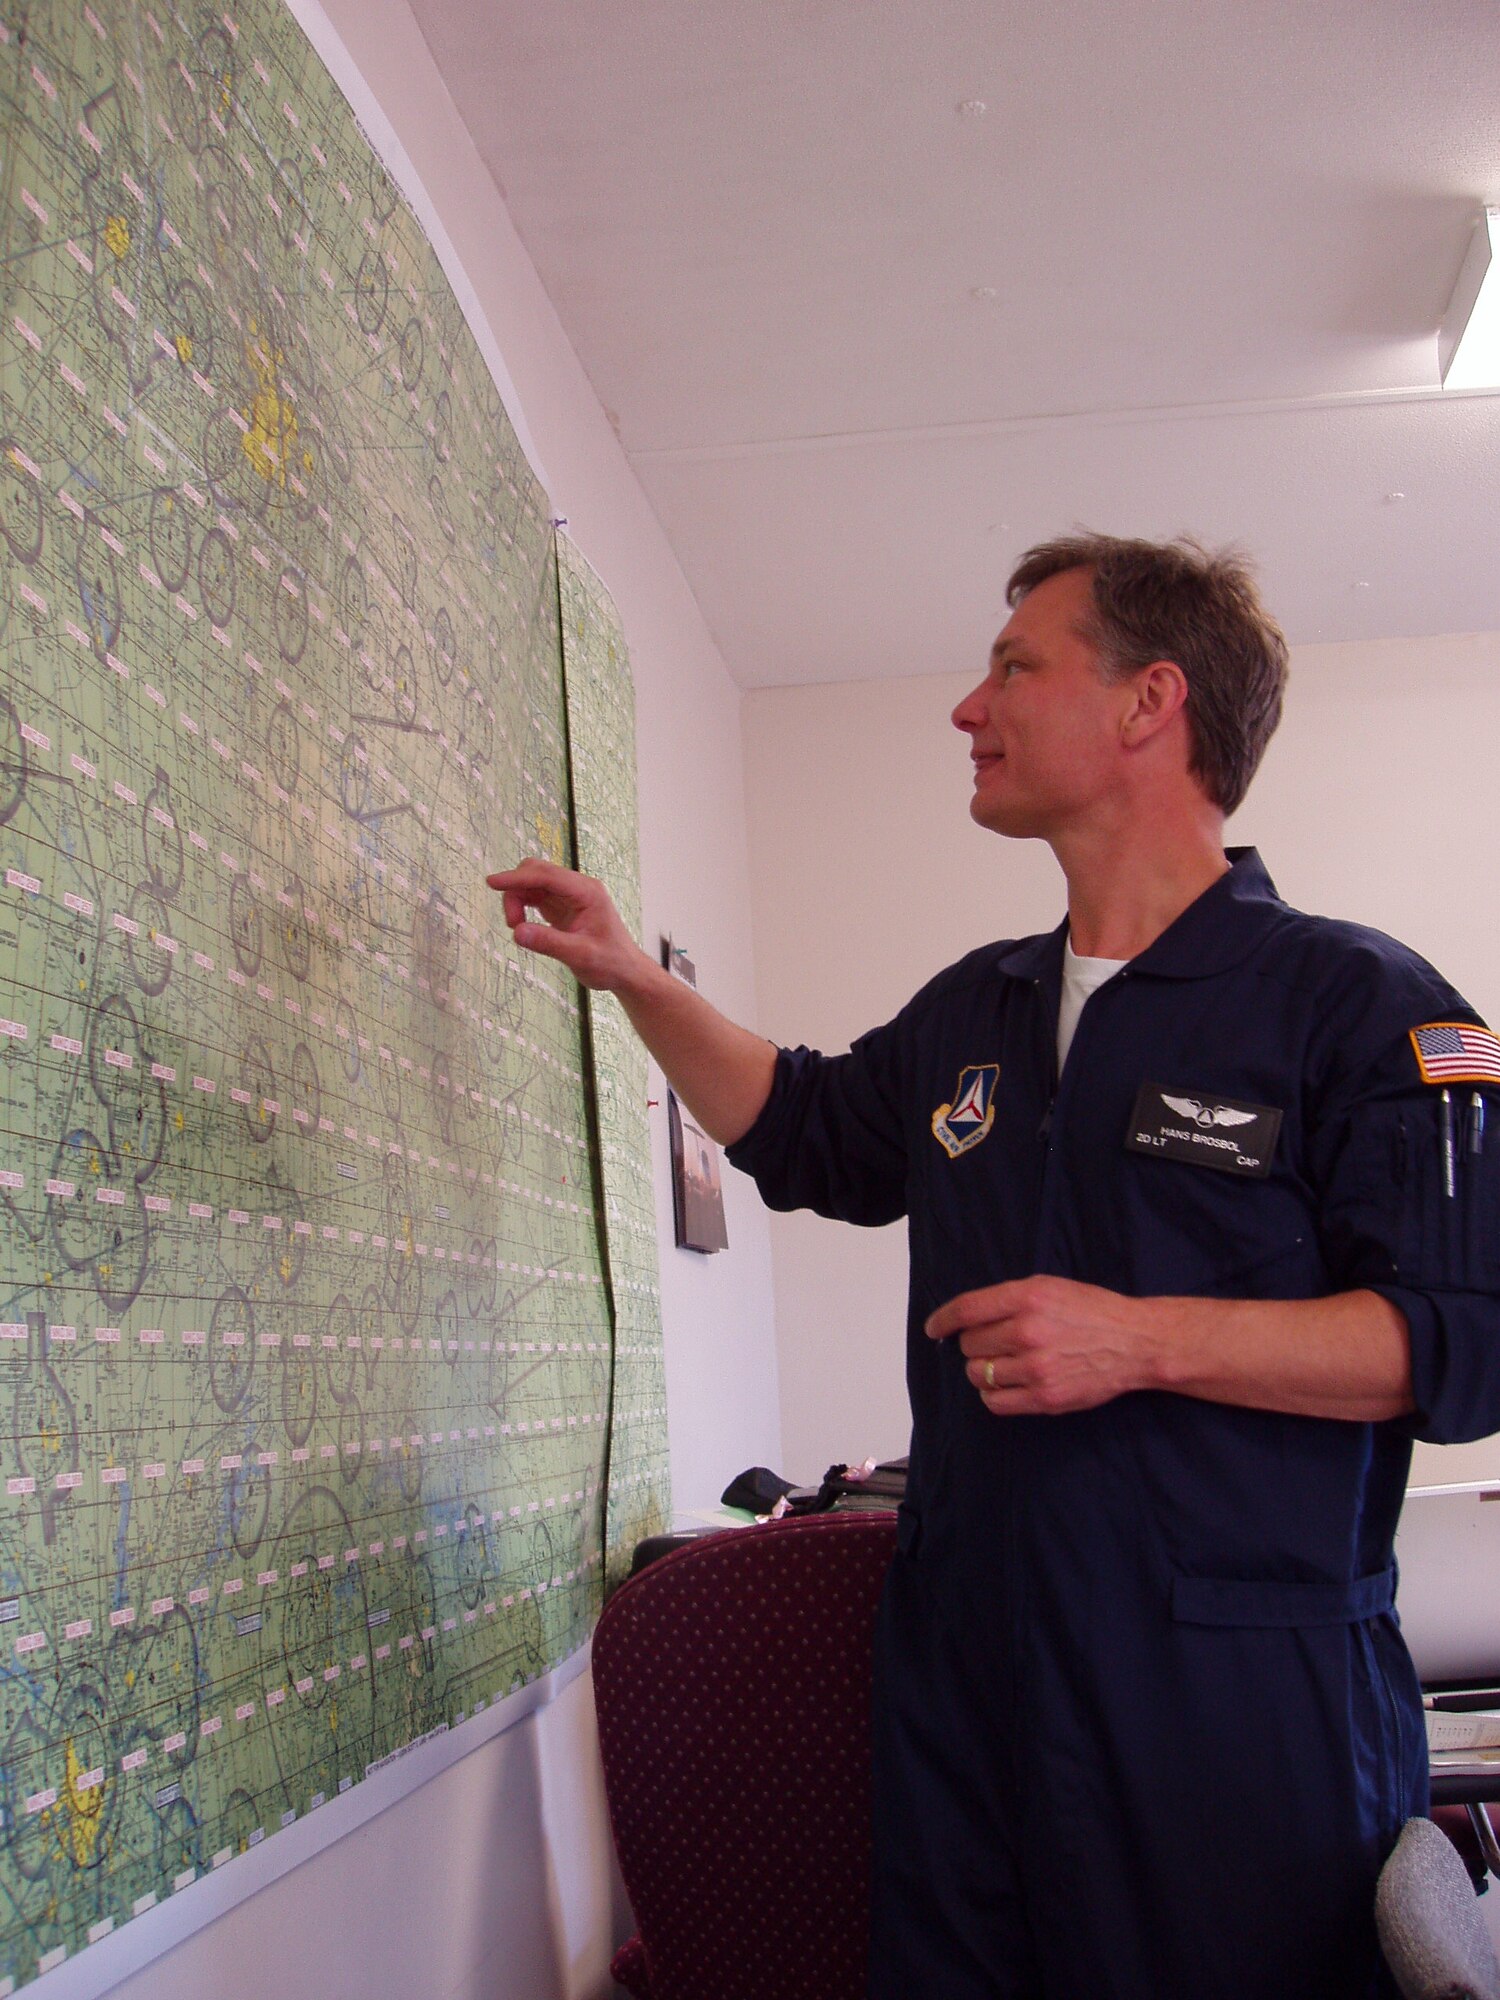 2nd Lt. Hans Brosbol, Gateway Senior Squadron, reviews air charts prior to flying "high bird" on day two of the exercise. (Civil Air Patrol photo by Lt. Col. David A. Miller)